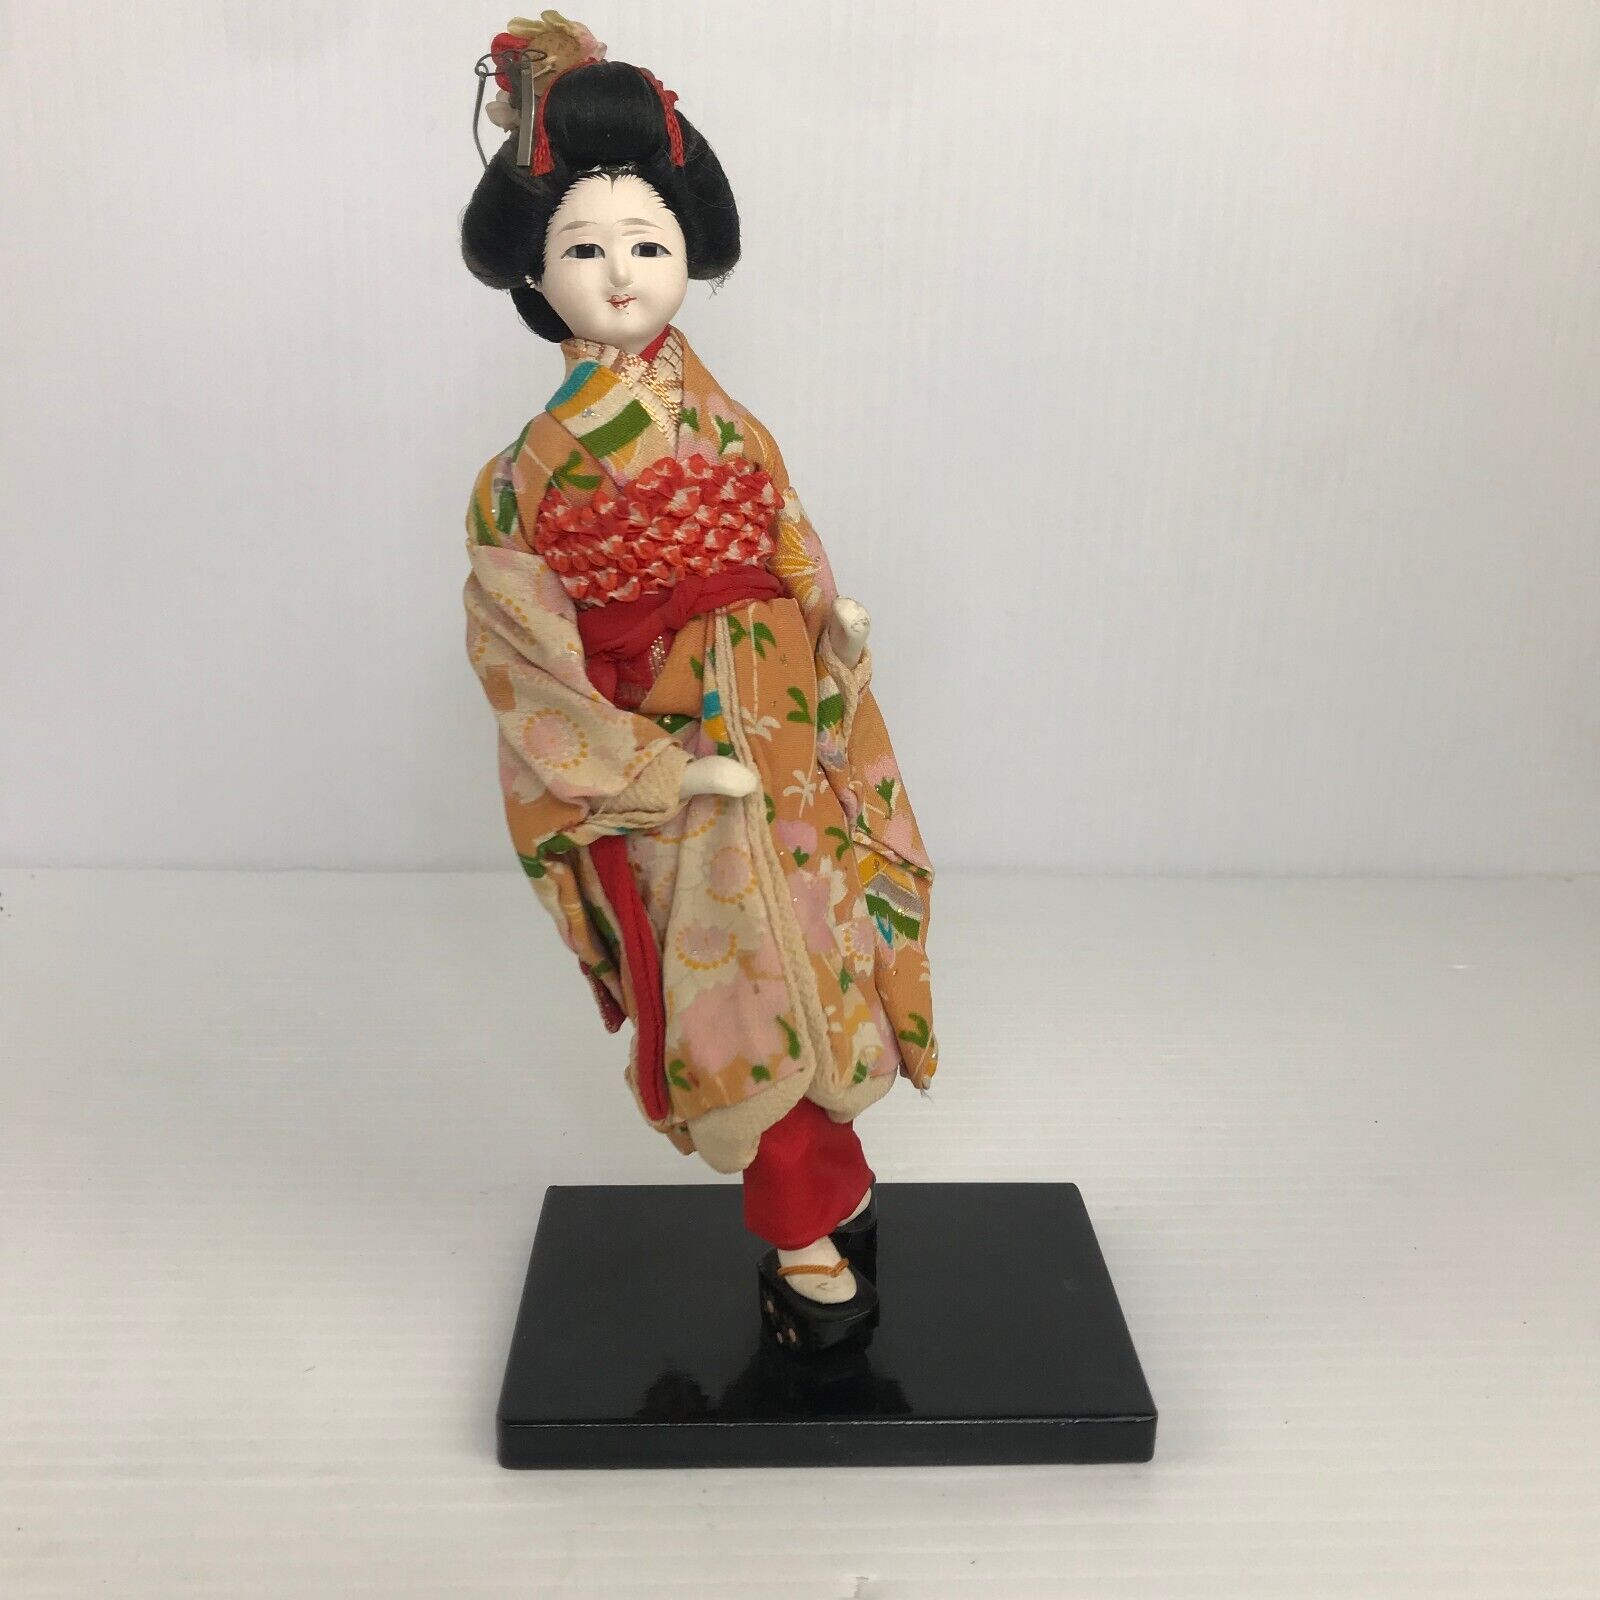 Vintage Japanese Maiko Geisha Doll 1950s Hand Painted Carved Red Silk 9 Inches